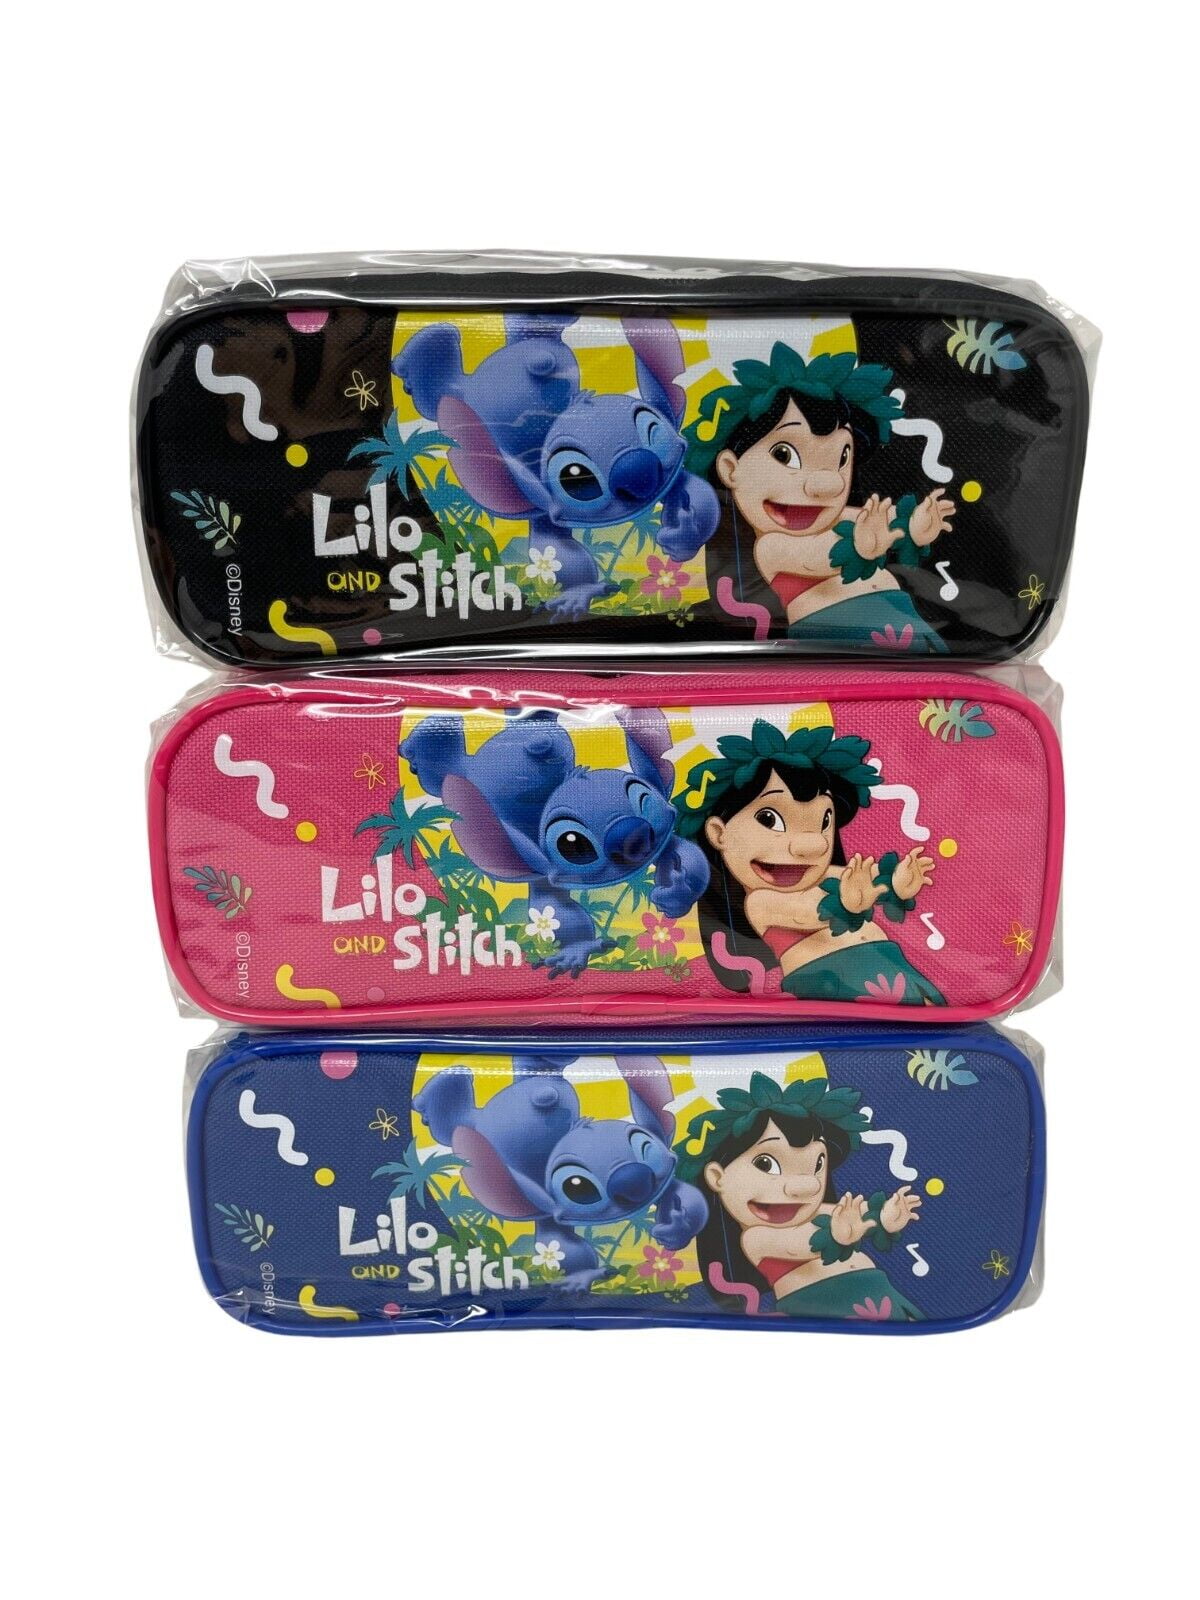 1 PC Disney Lilo & Stitch Pencil Case Zippered Bag -Color May Vary